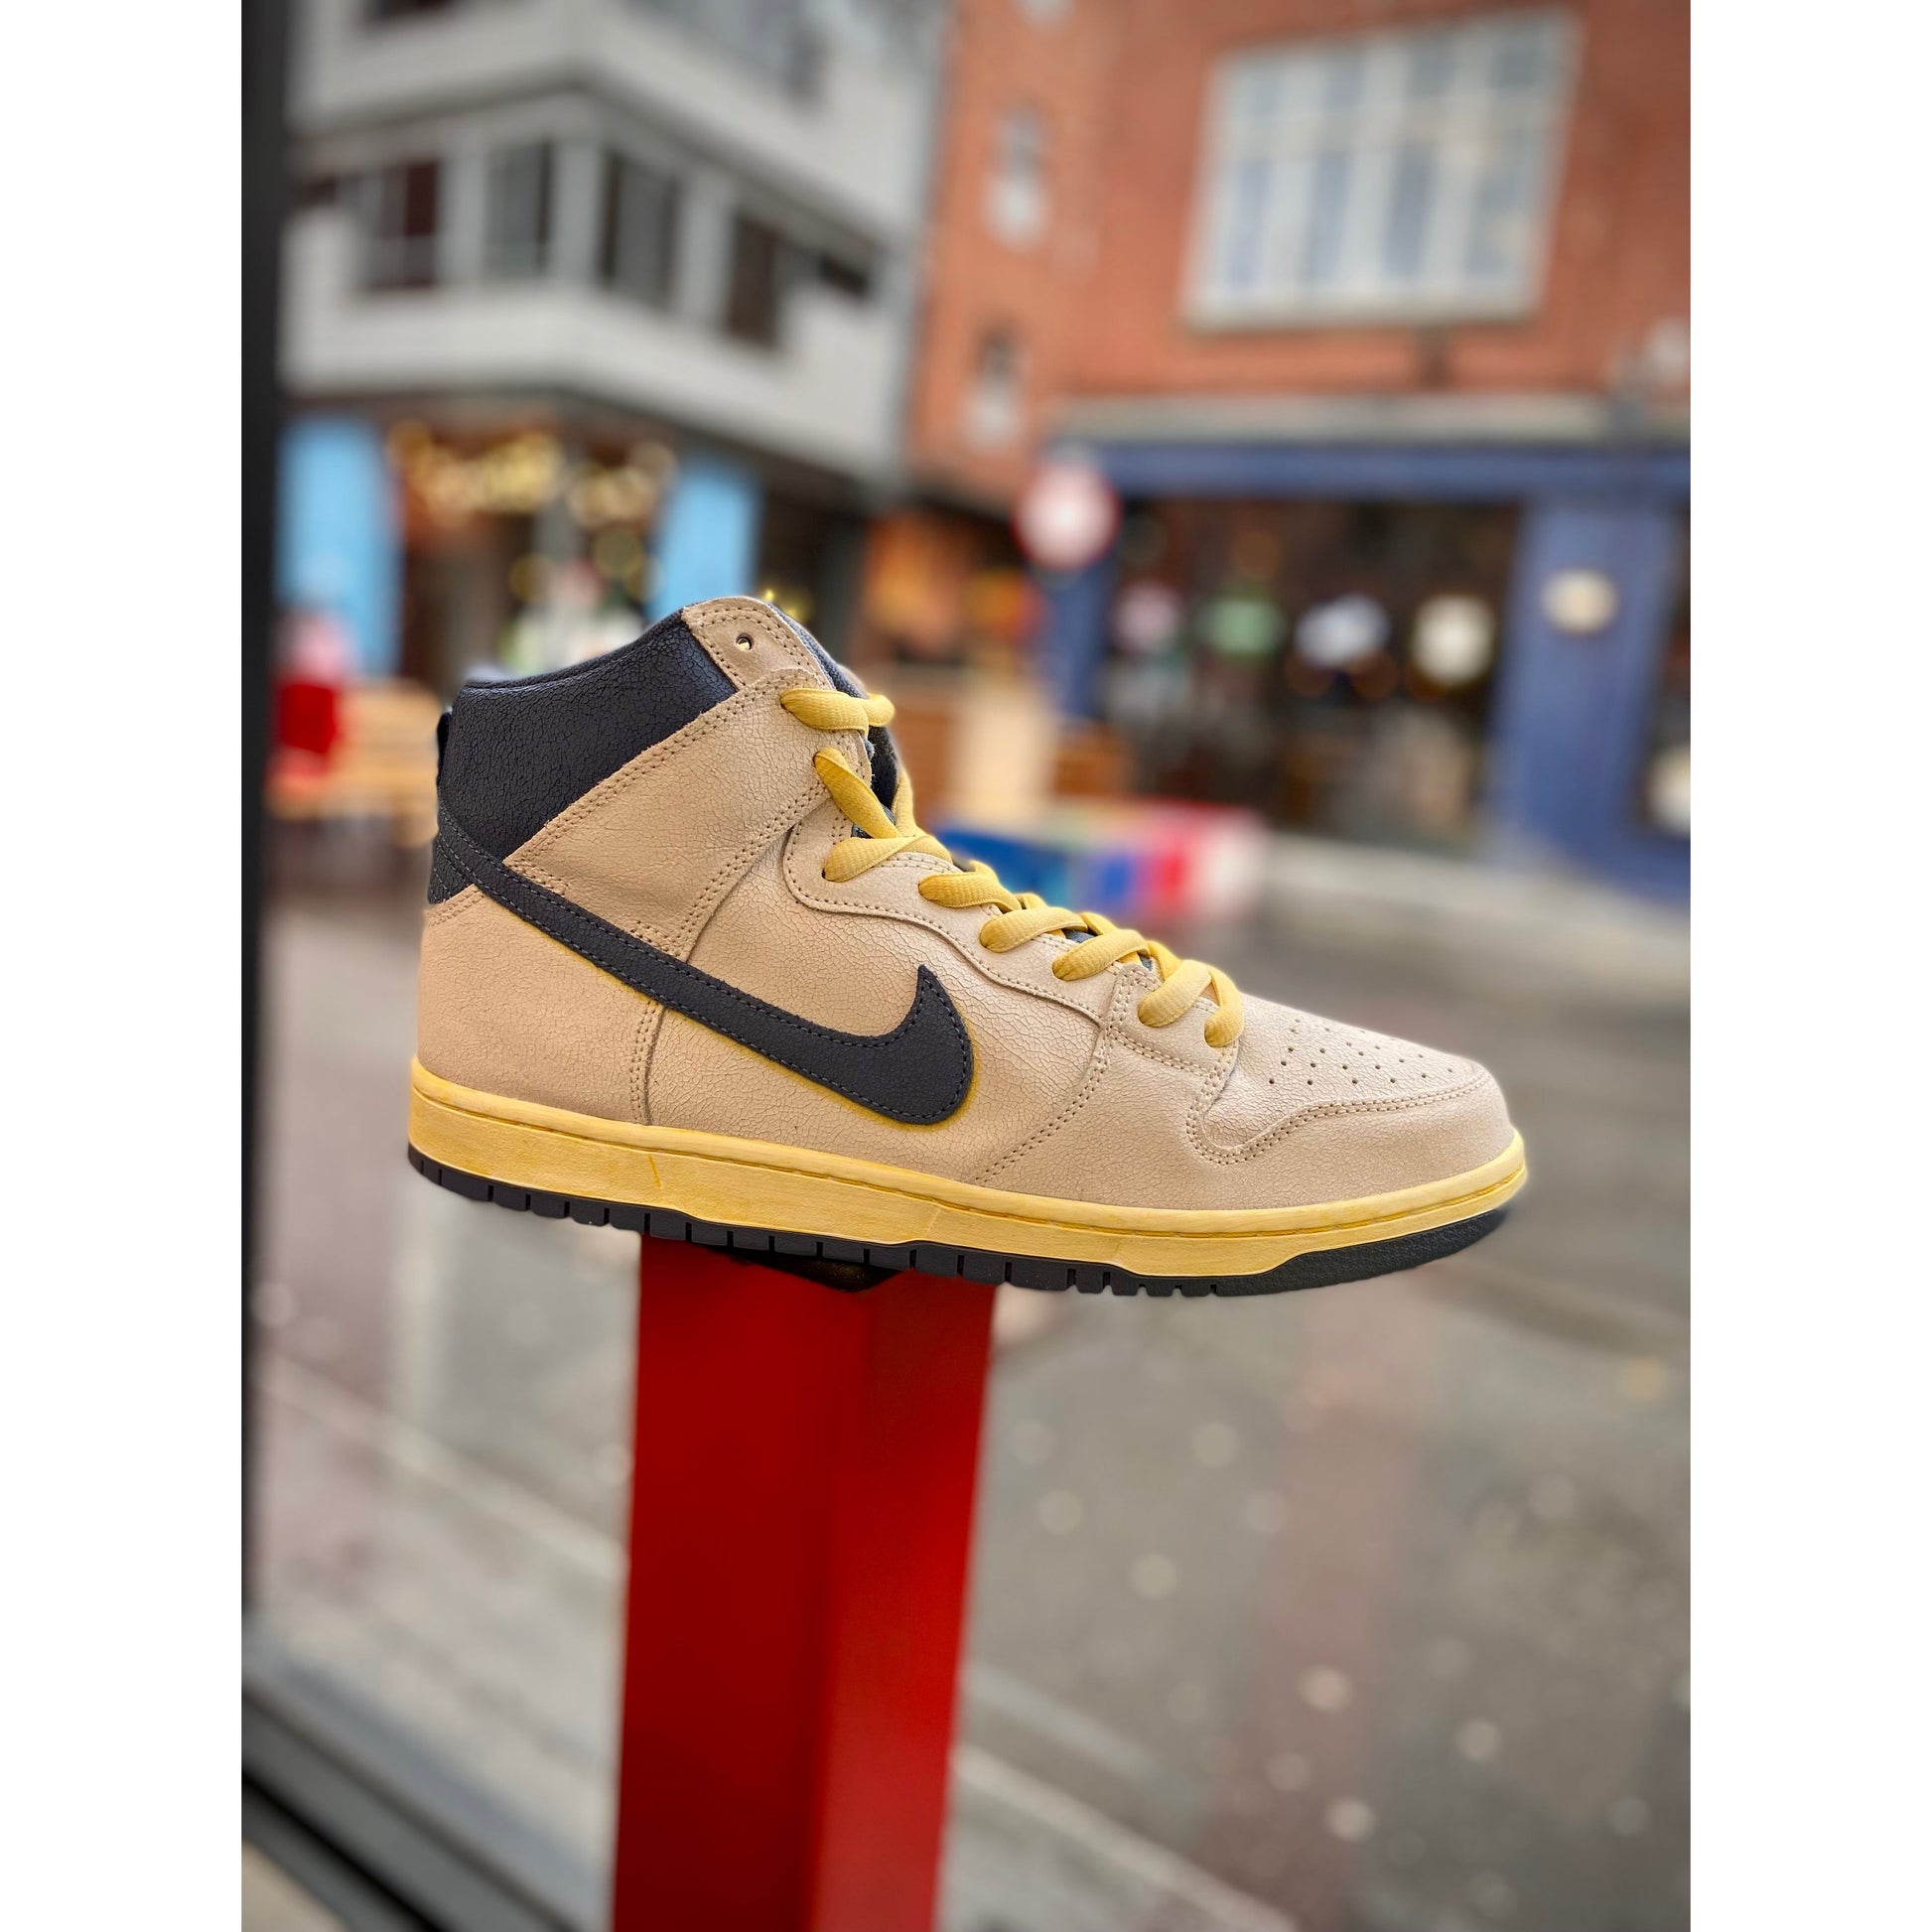 Nike SB Dunk High Atlas Lost at Sea (2020) from Nike